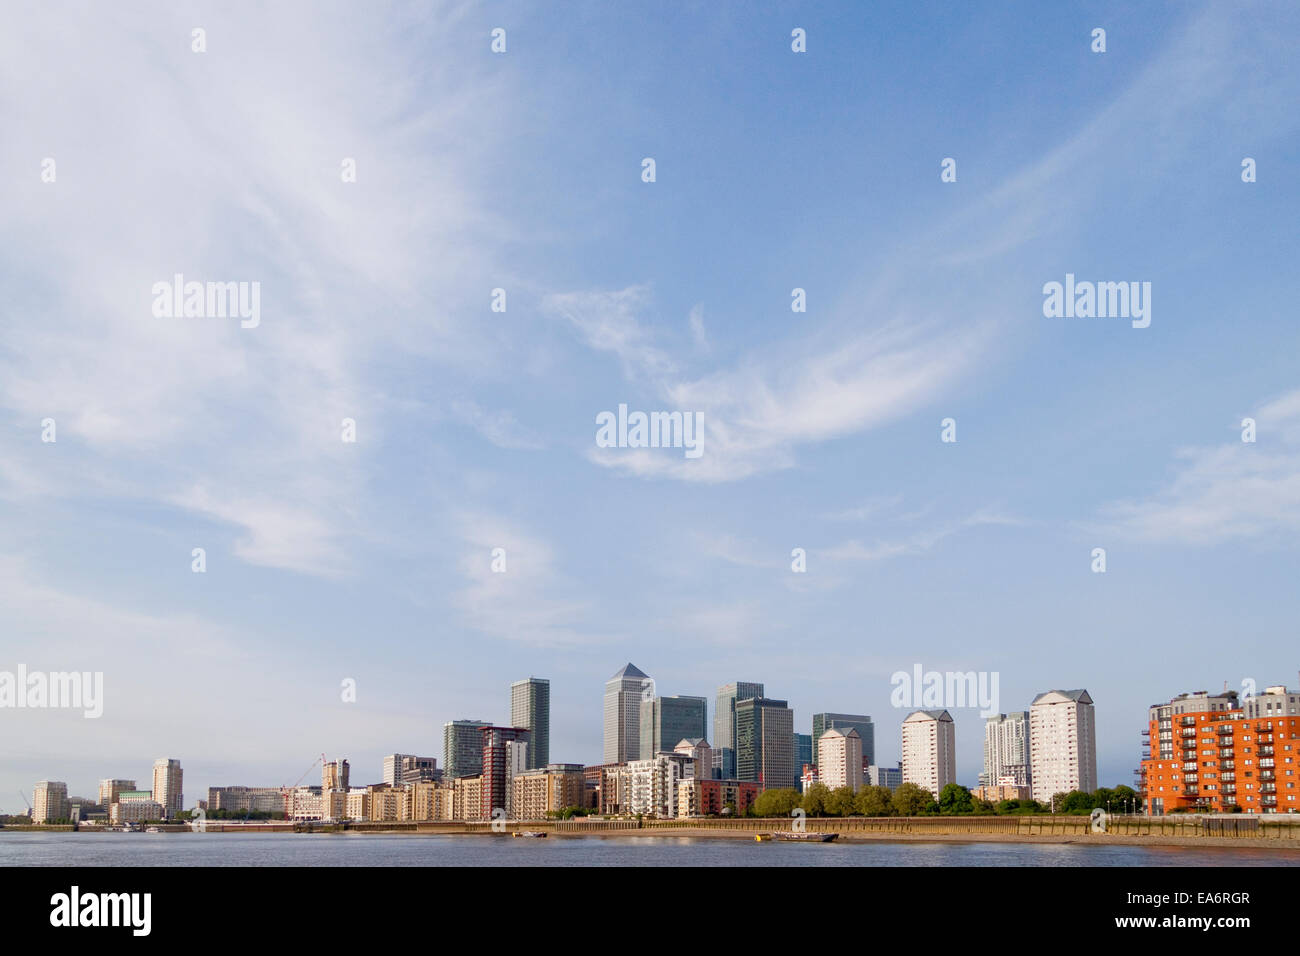 Canary Wharf and Isle of Dogs, London, against a big sky, River Thames in the foreground Stock Photo